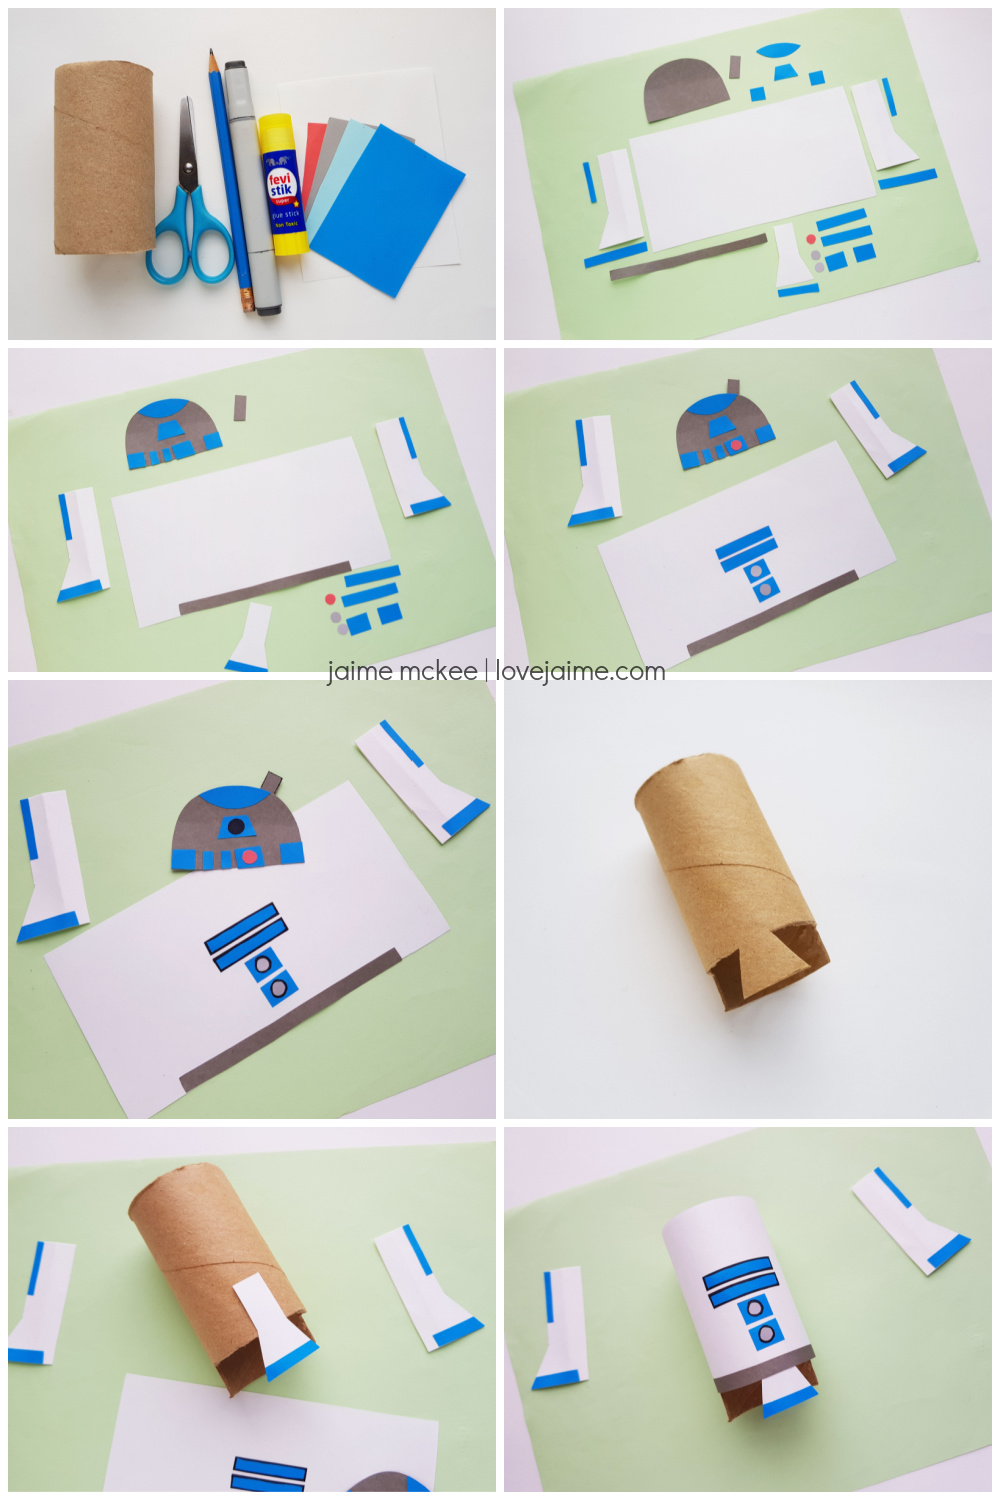 R2D2 Paper craft (using an empty toilet paper roll!)